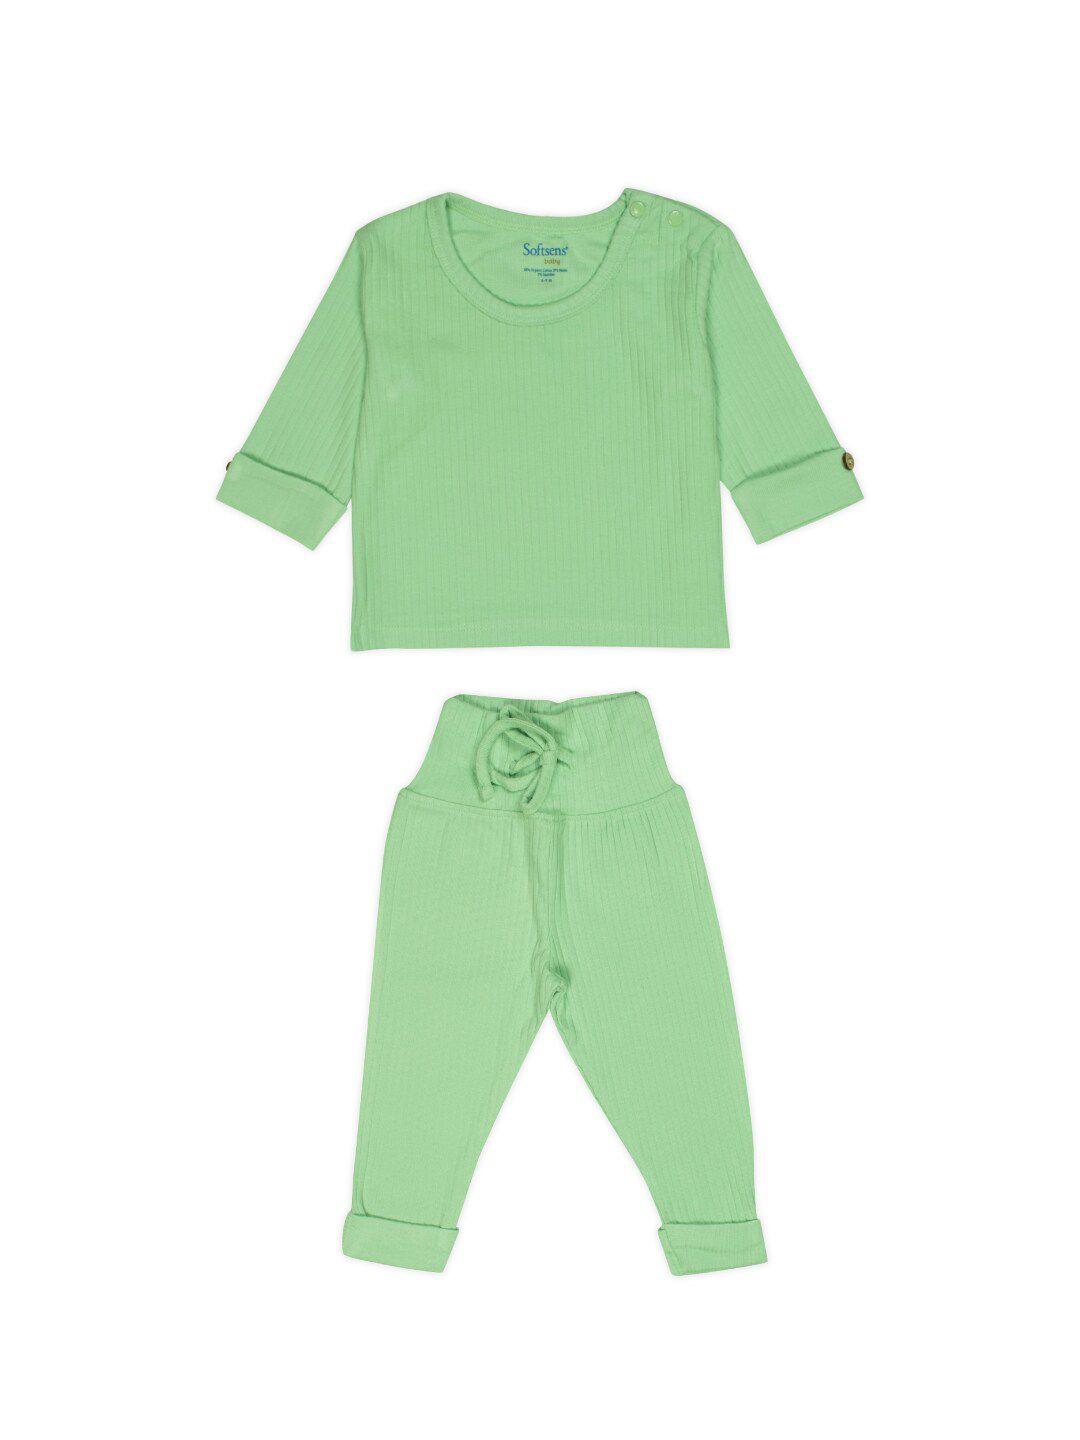 softsens kids top with trousers